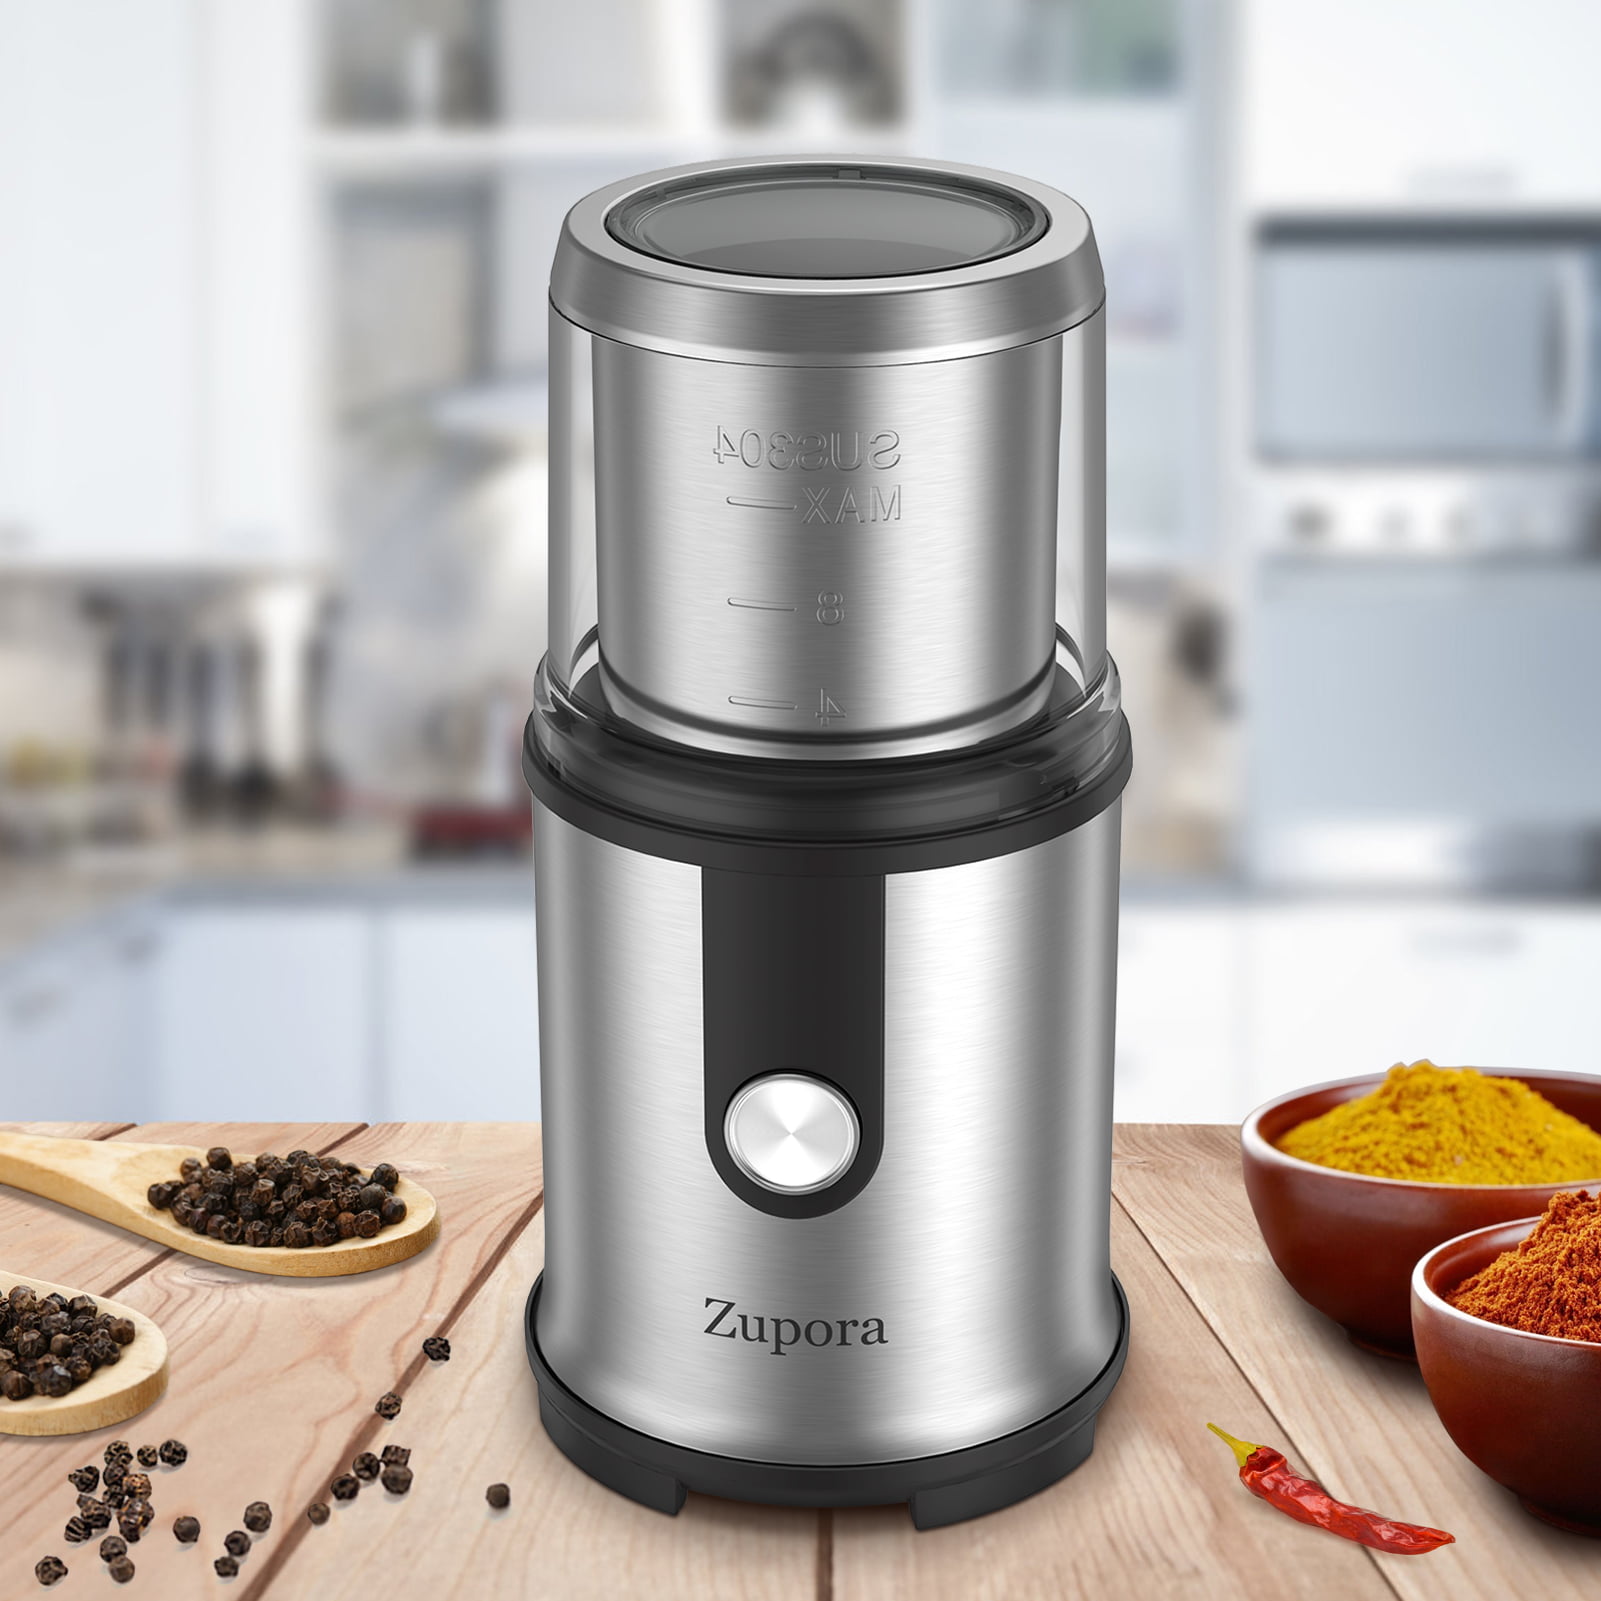 Clear Lid Sugar 50g/8 Cups Gevi 150W Spice Grinder with Stainless Steel Blade & Bowl Black Coffee Grinder Electric Grains One-Touch Control Coffee Bean Grinder for Nuts